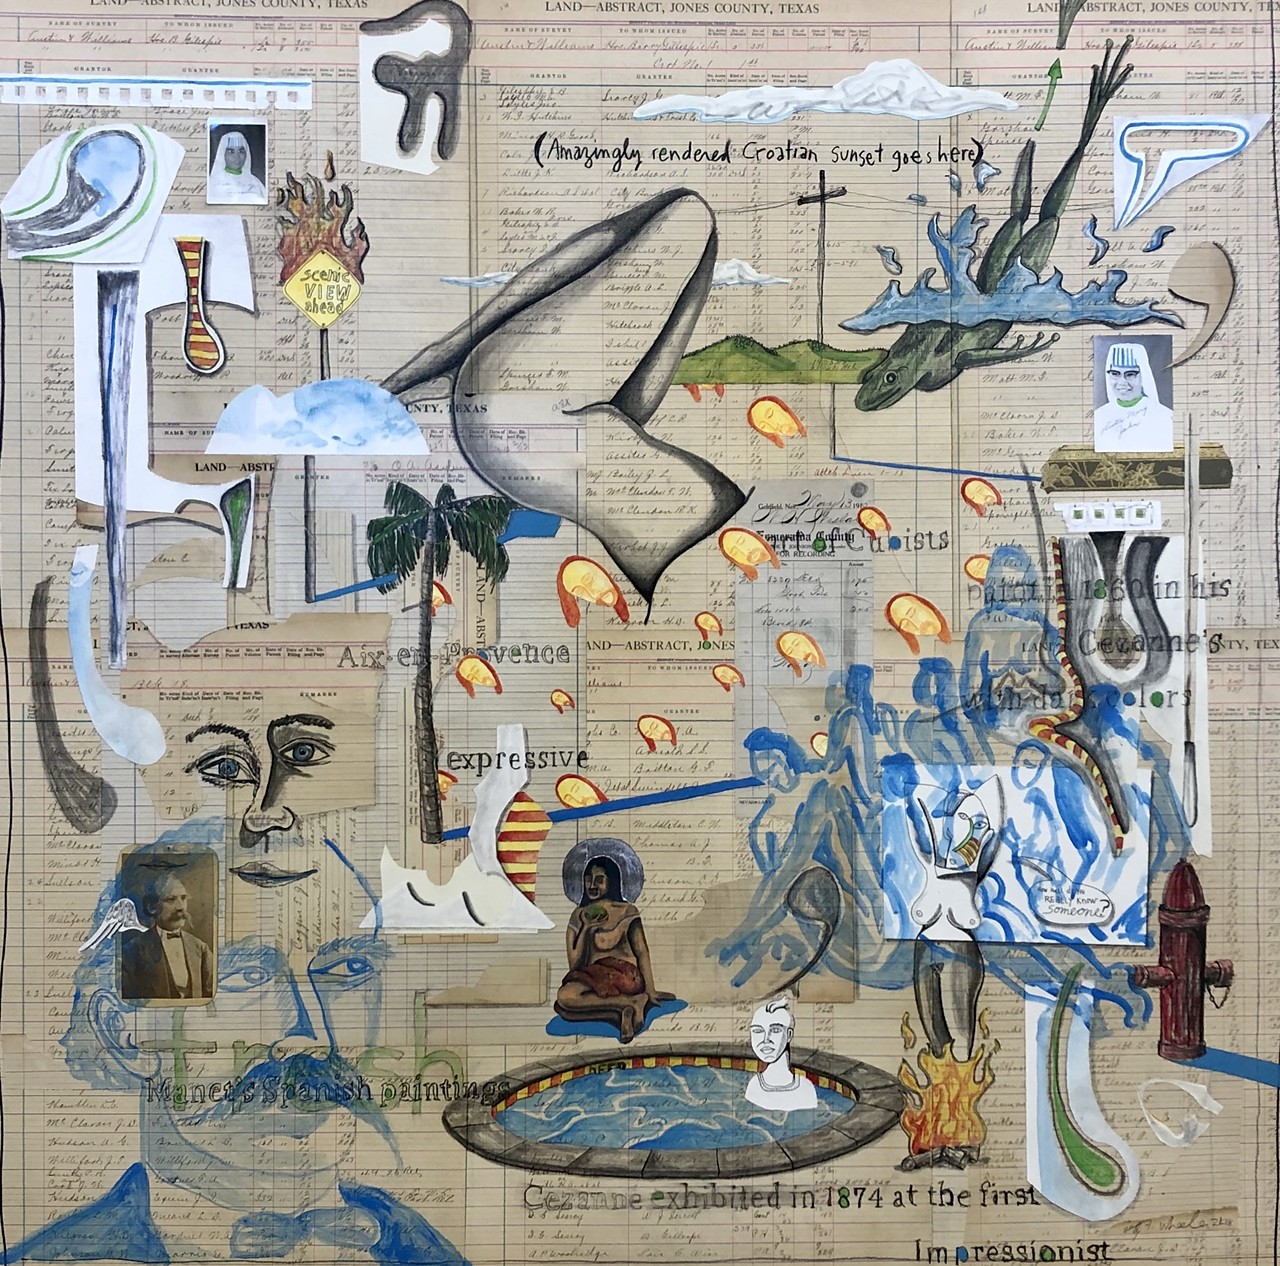 “JUST THIS SIDE OF SALT LAKE,” acrylic, charcoal and collage on paper, 48” x 48”, $4,000